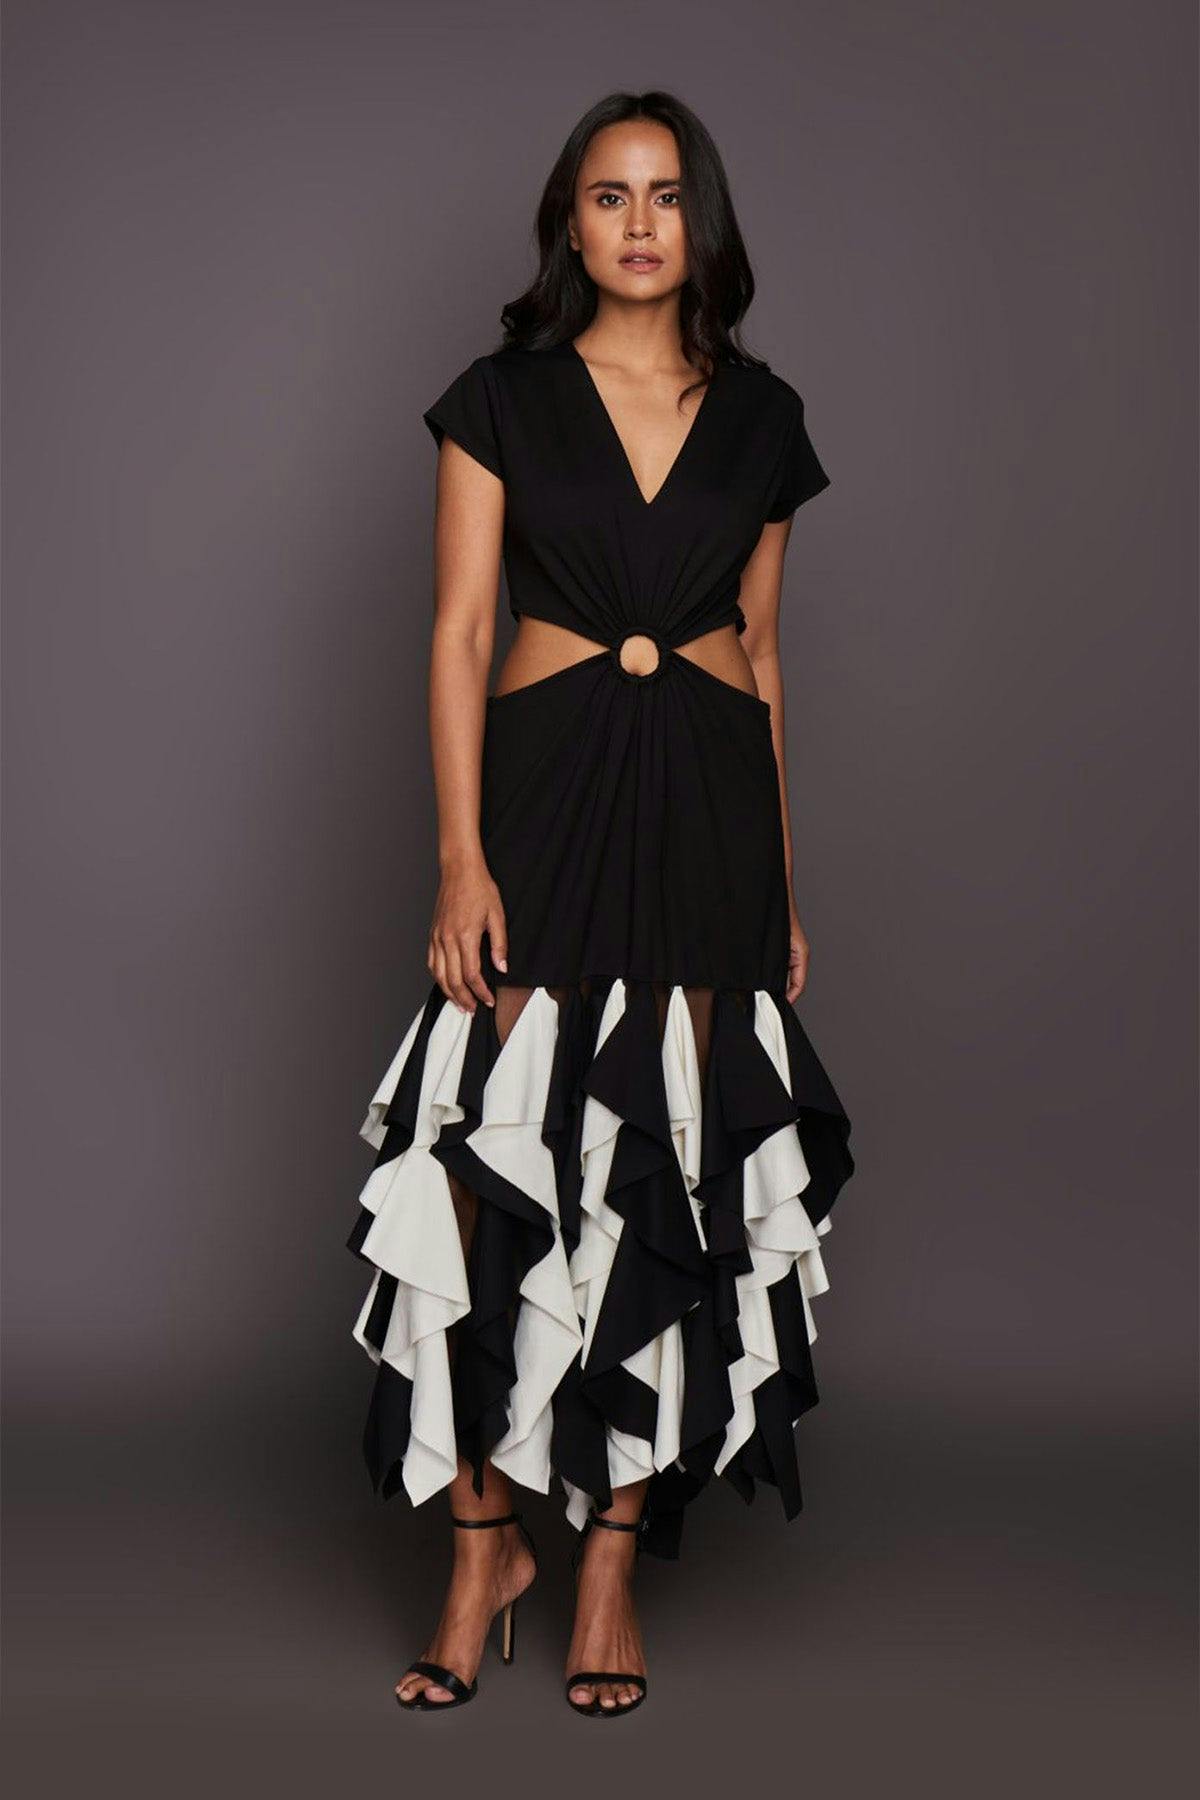 Thumbnail preview #2 for Black & White Side Cutout Dress With Ruffles